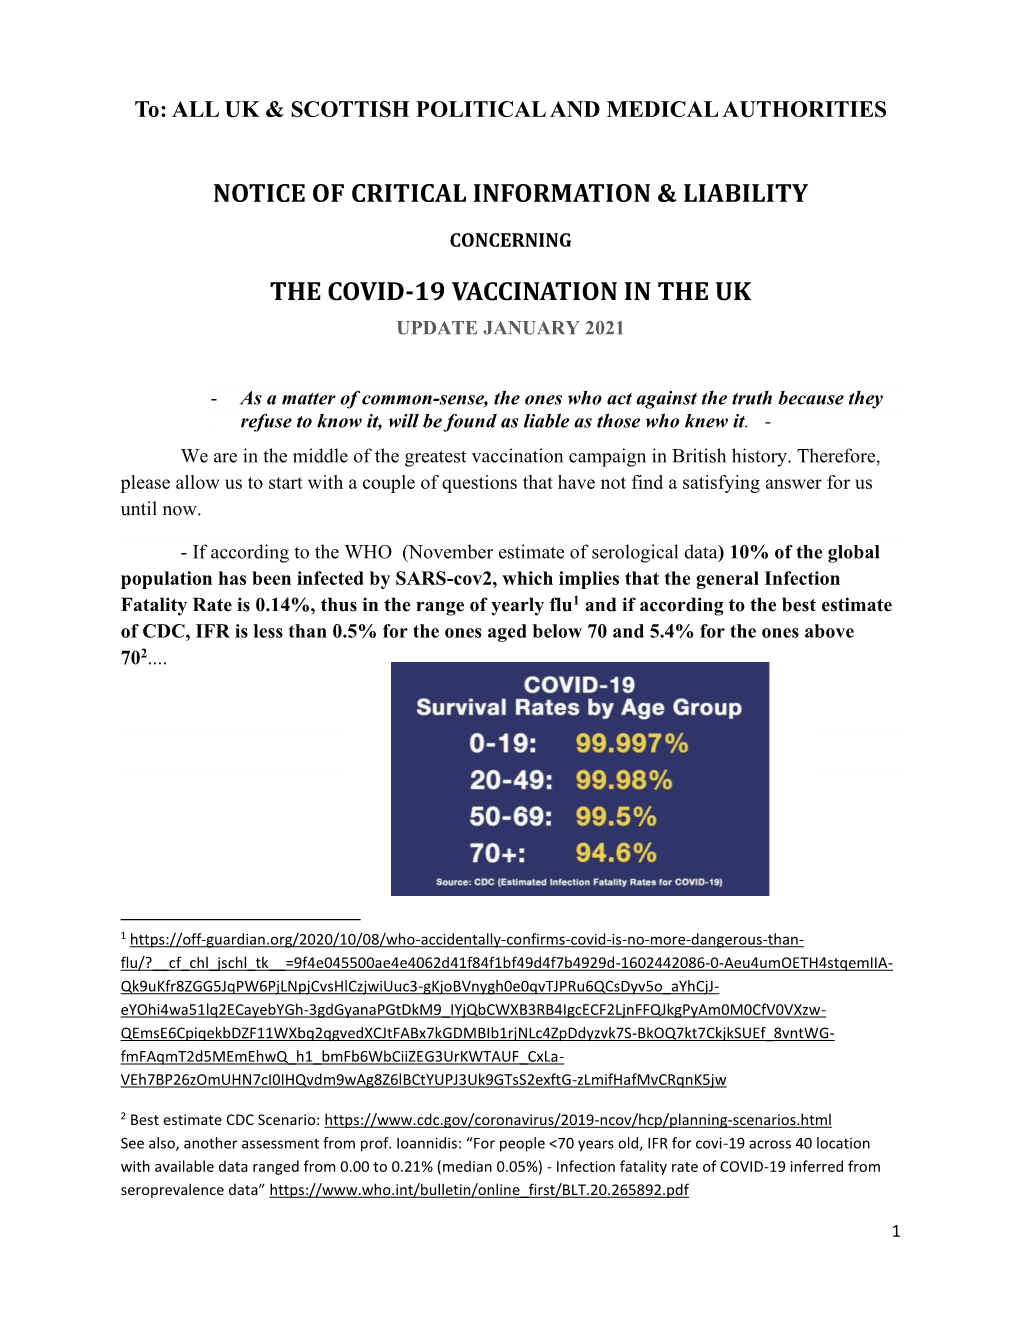 Notice of Critical Information & Liability the Covid-19